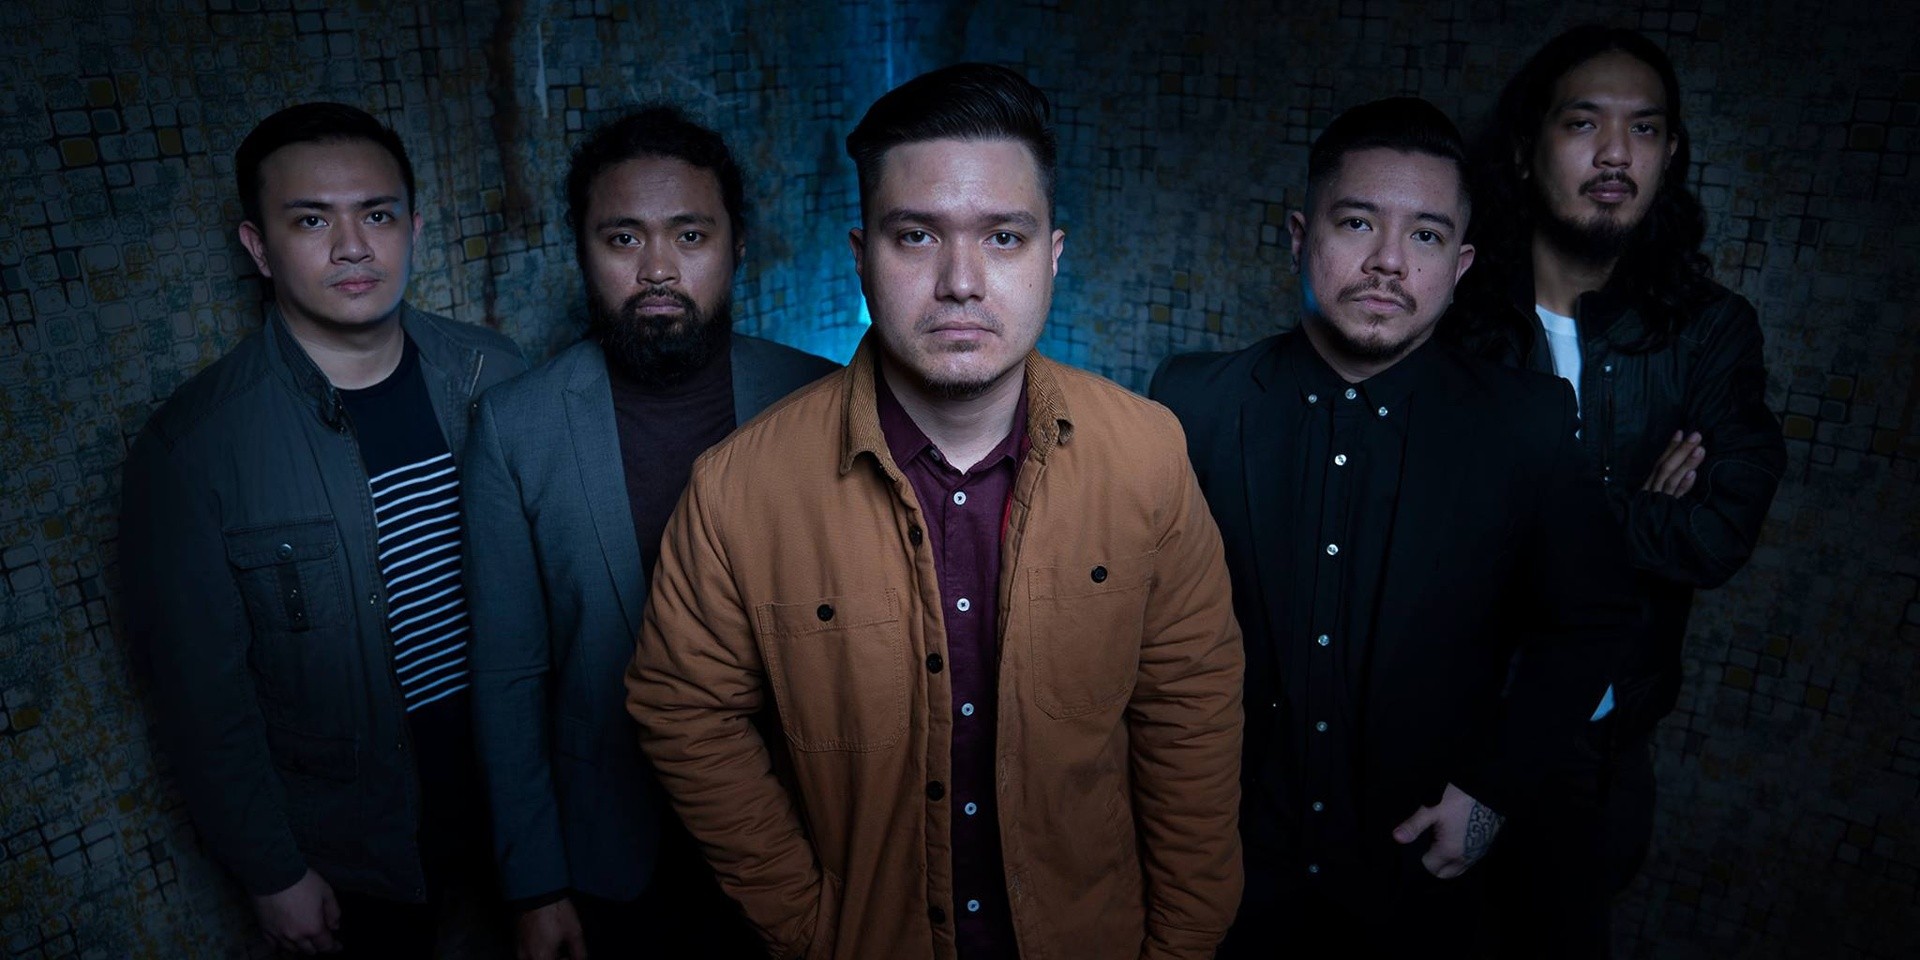 Faspitch to hold 'Flame' music video launch with Urbandub, VIE, and Delaney